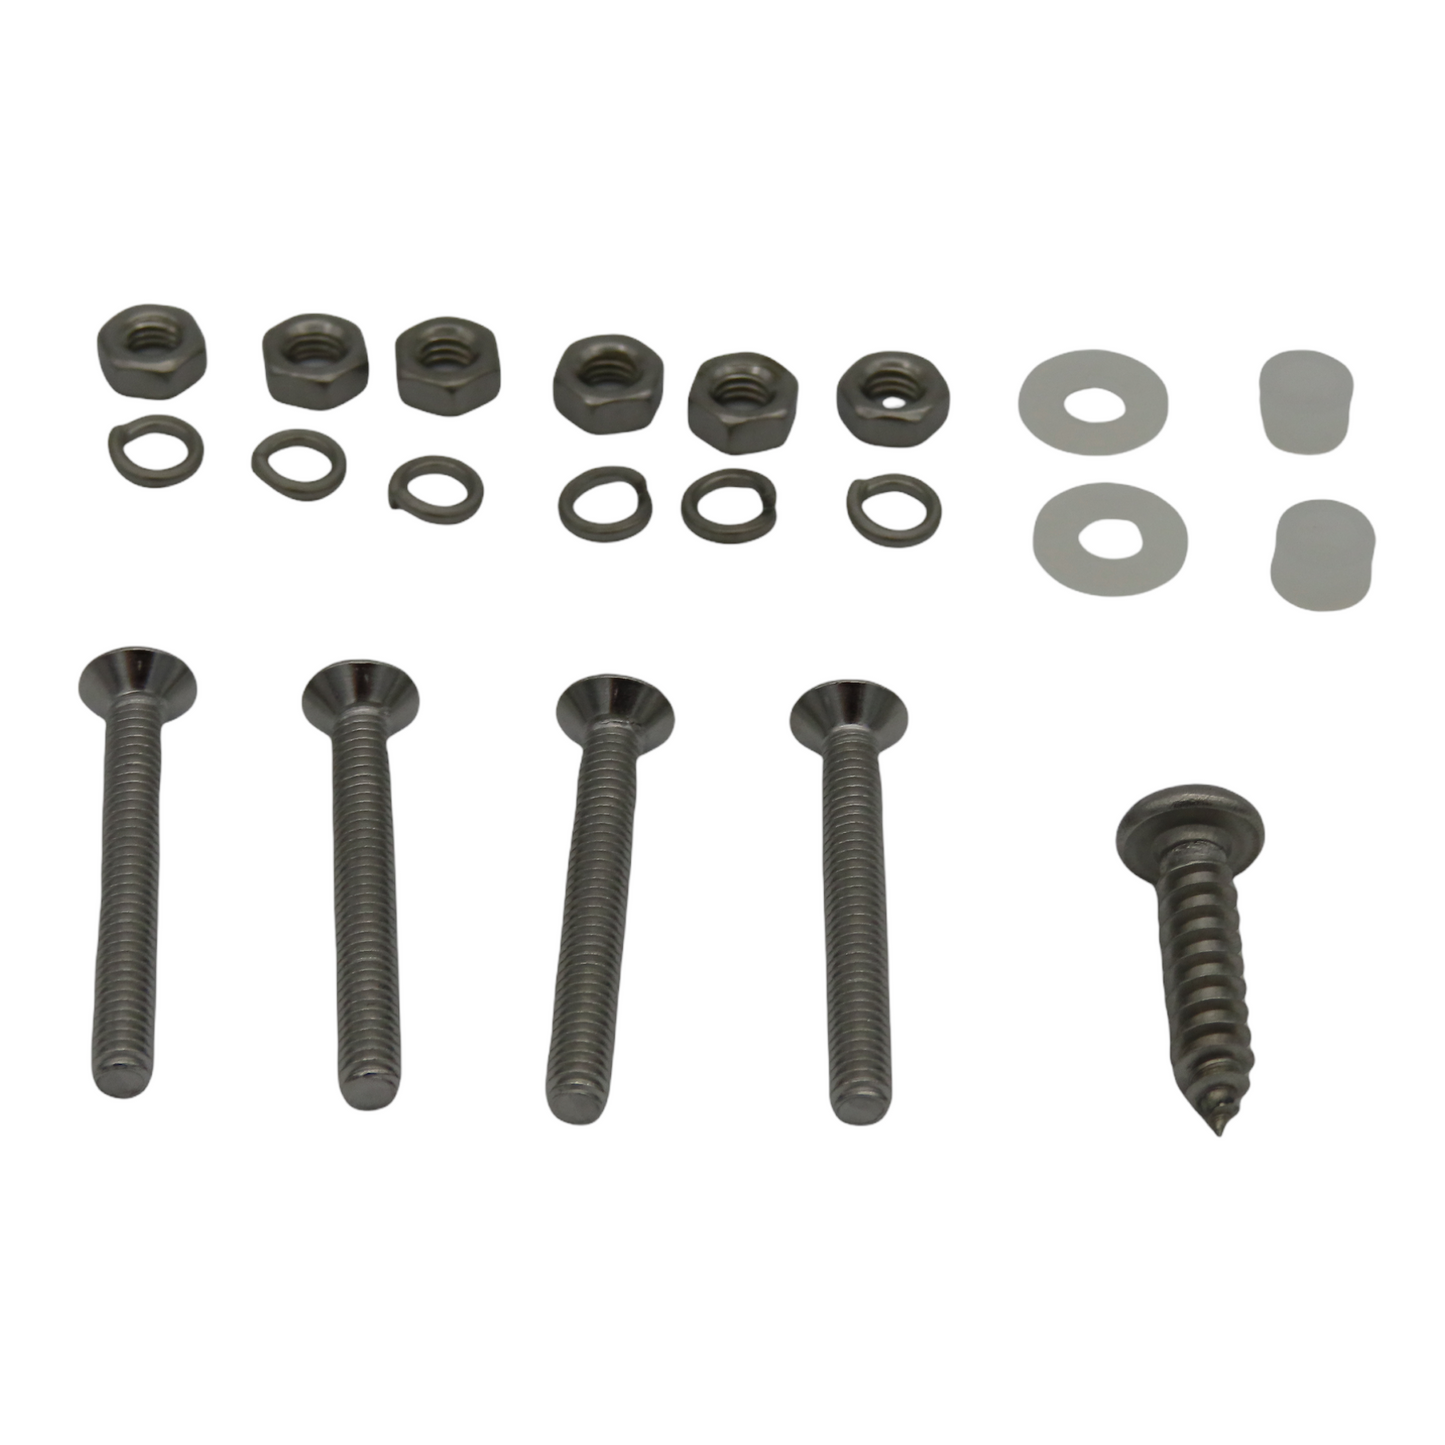 Replacement Screw Set with Nylon Parts for Sensor Pads